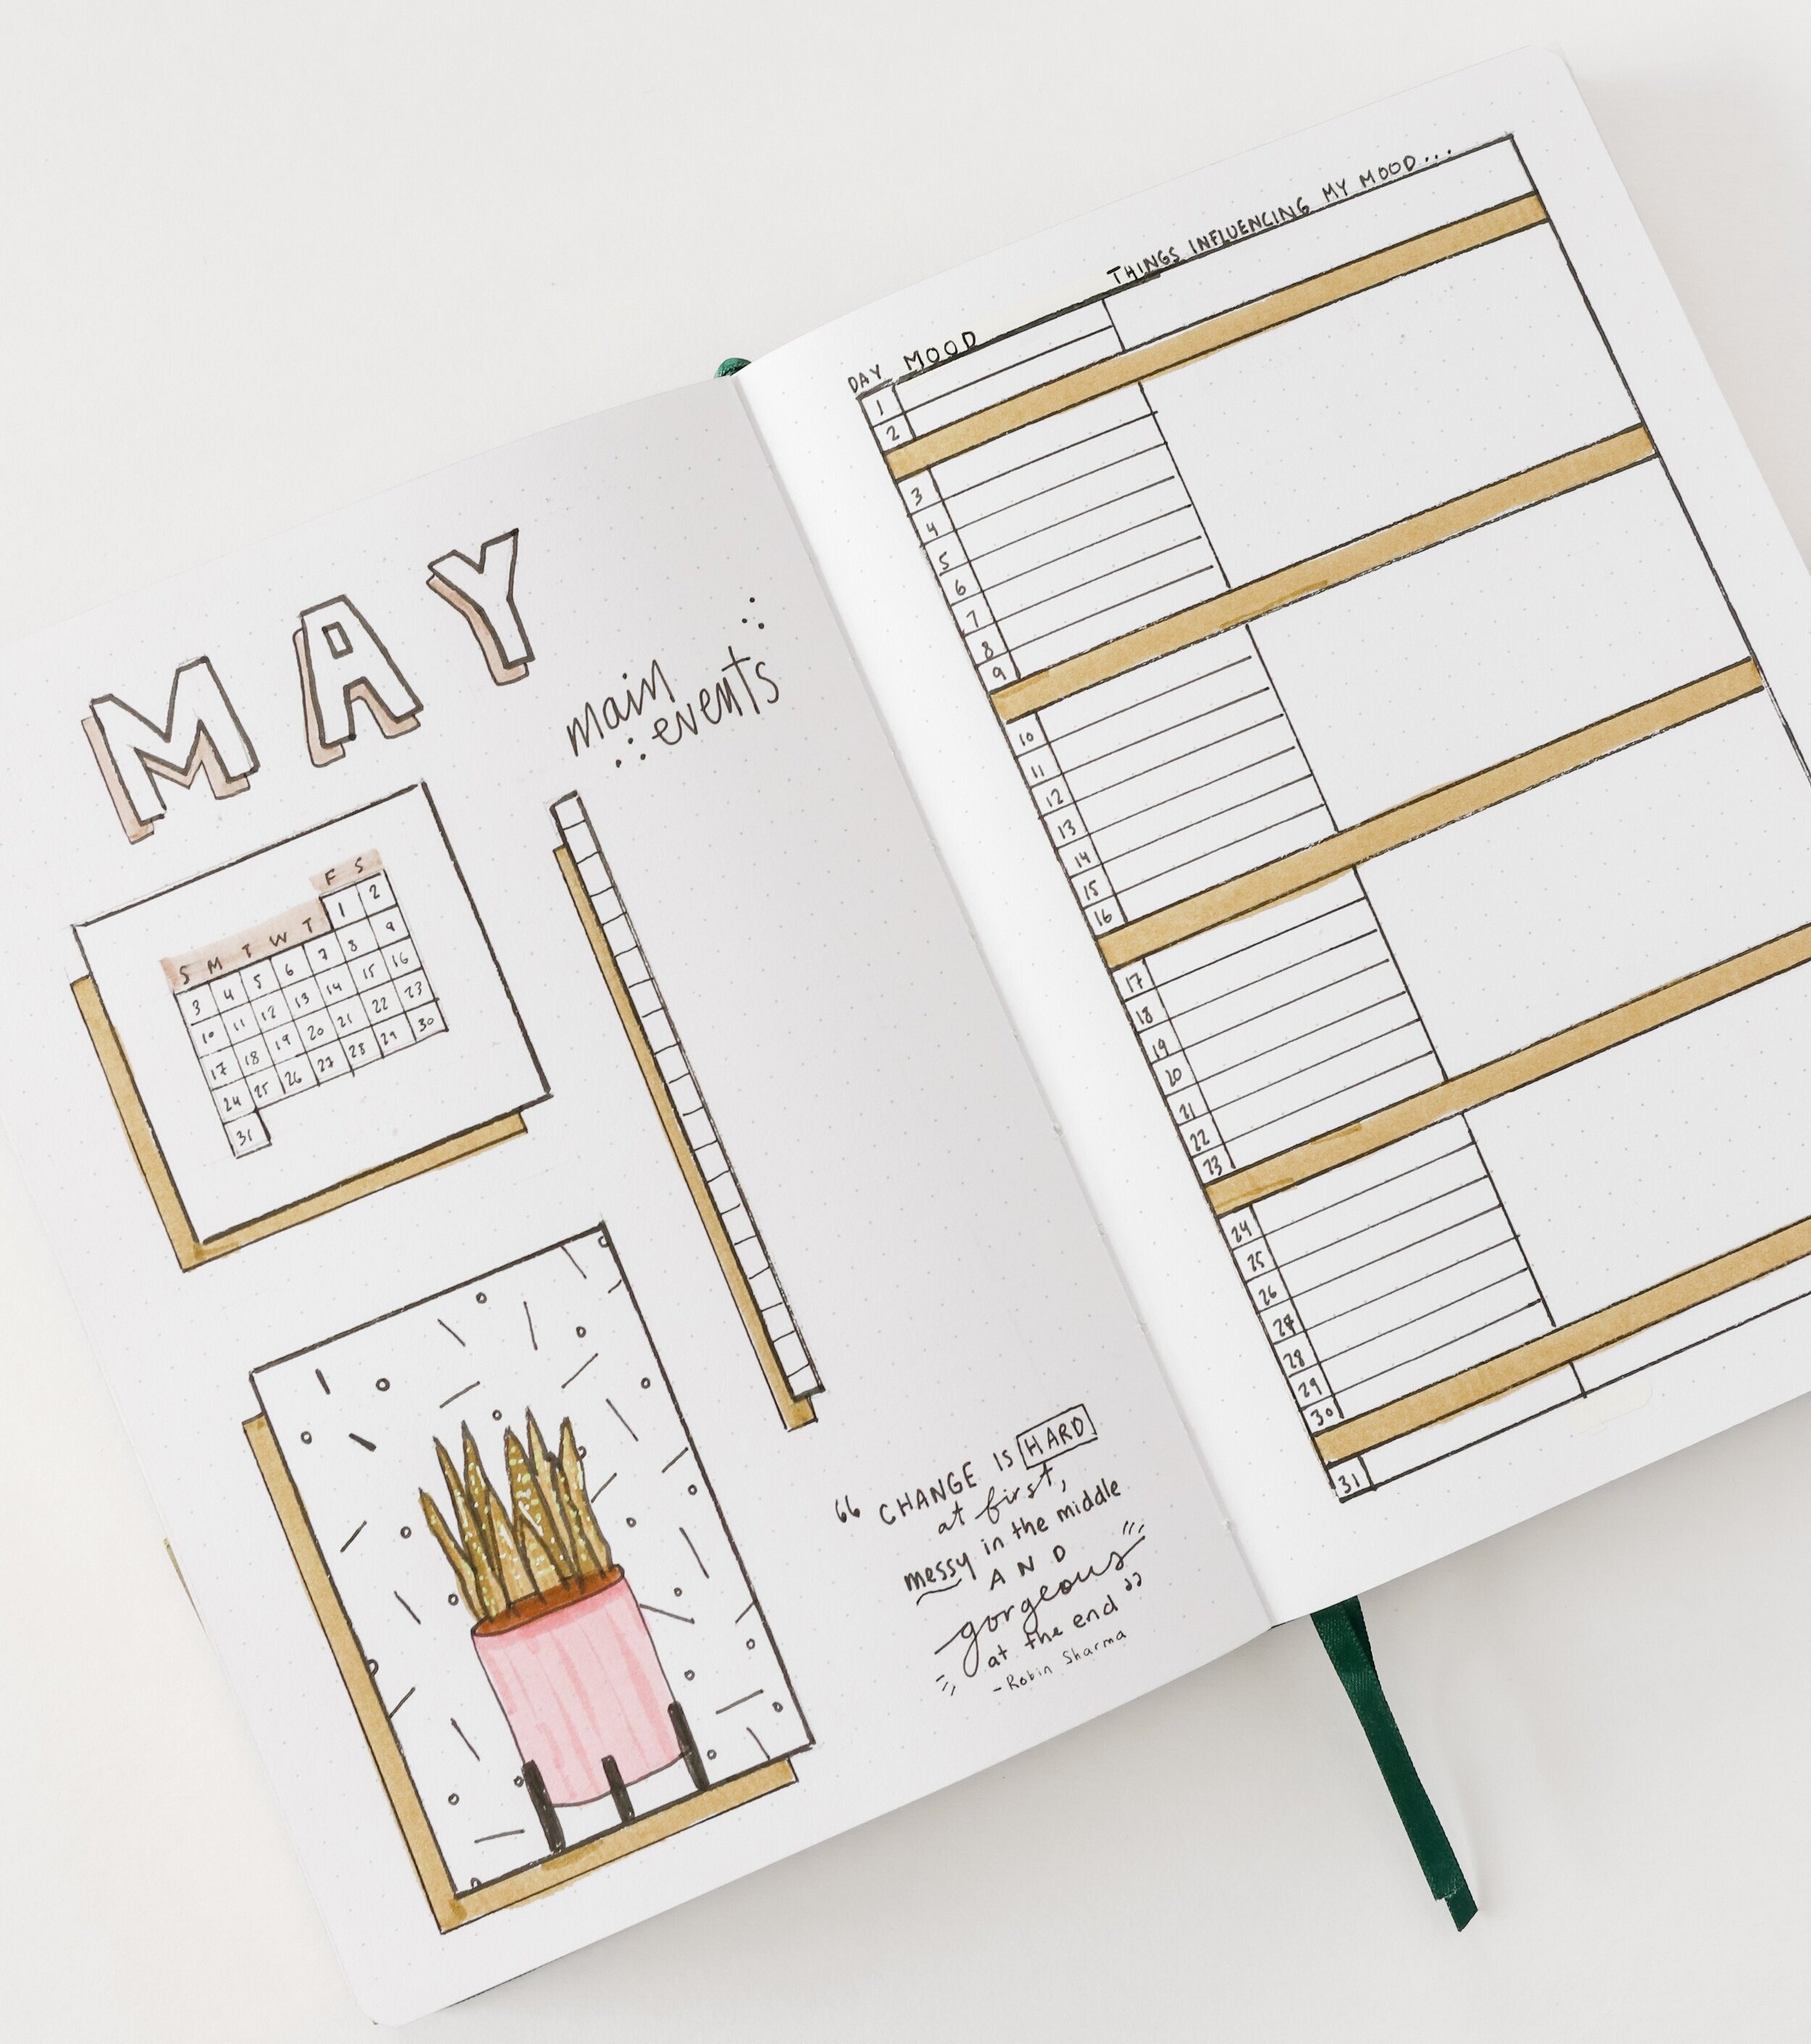 Using A Mood Board To Plan Your Next Bullet Journal Theme